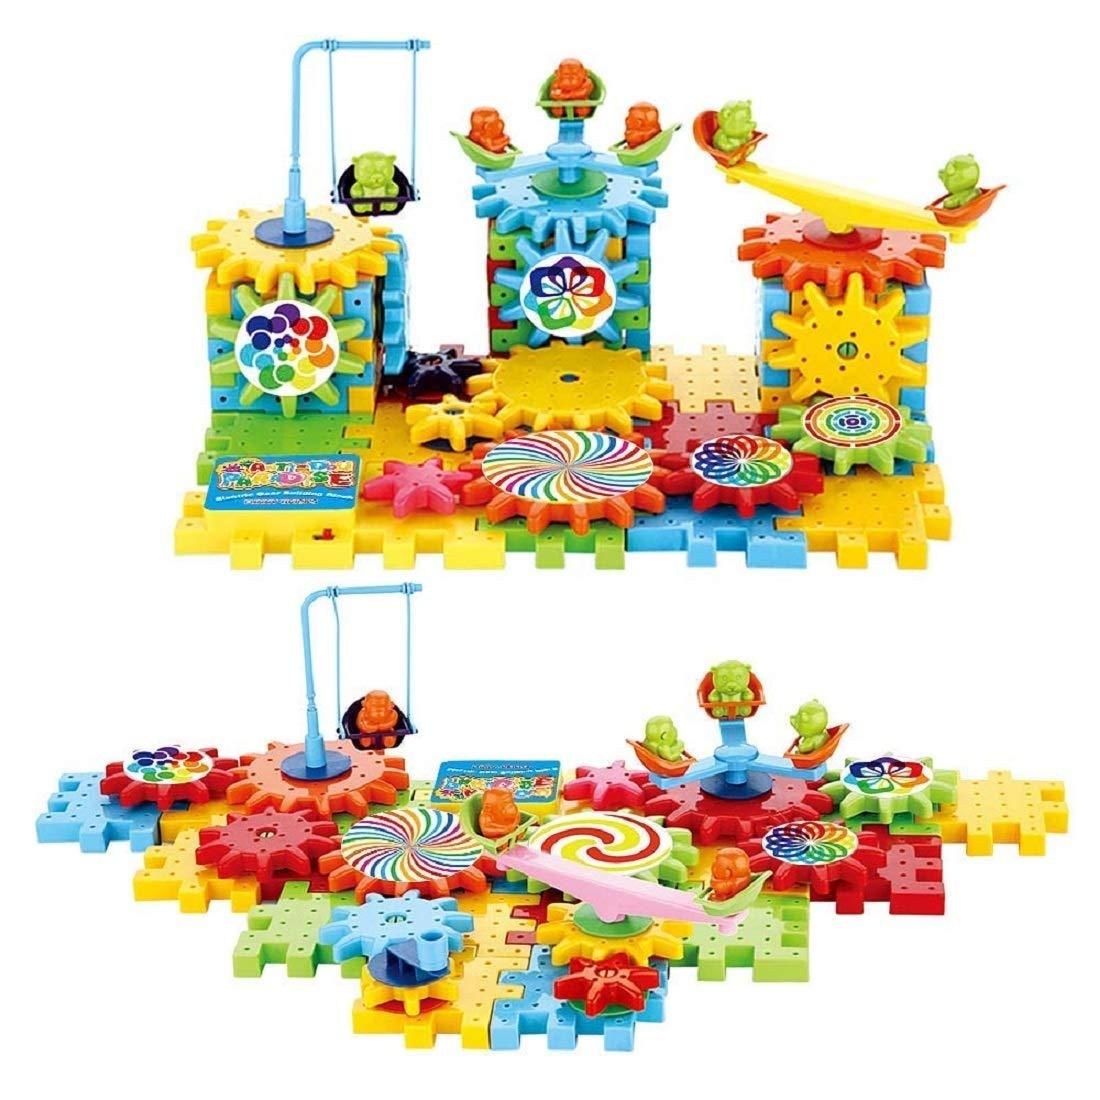 Battery Operated 81pcs Rotating Building Blocks with Gears for STEM Learning